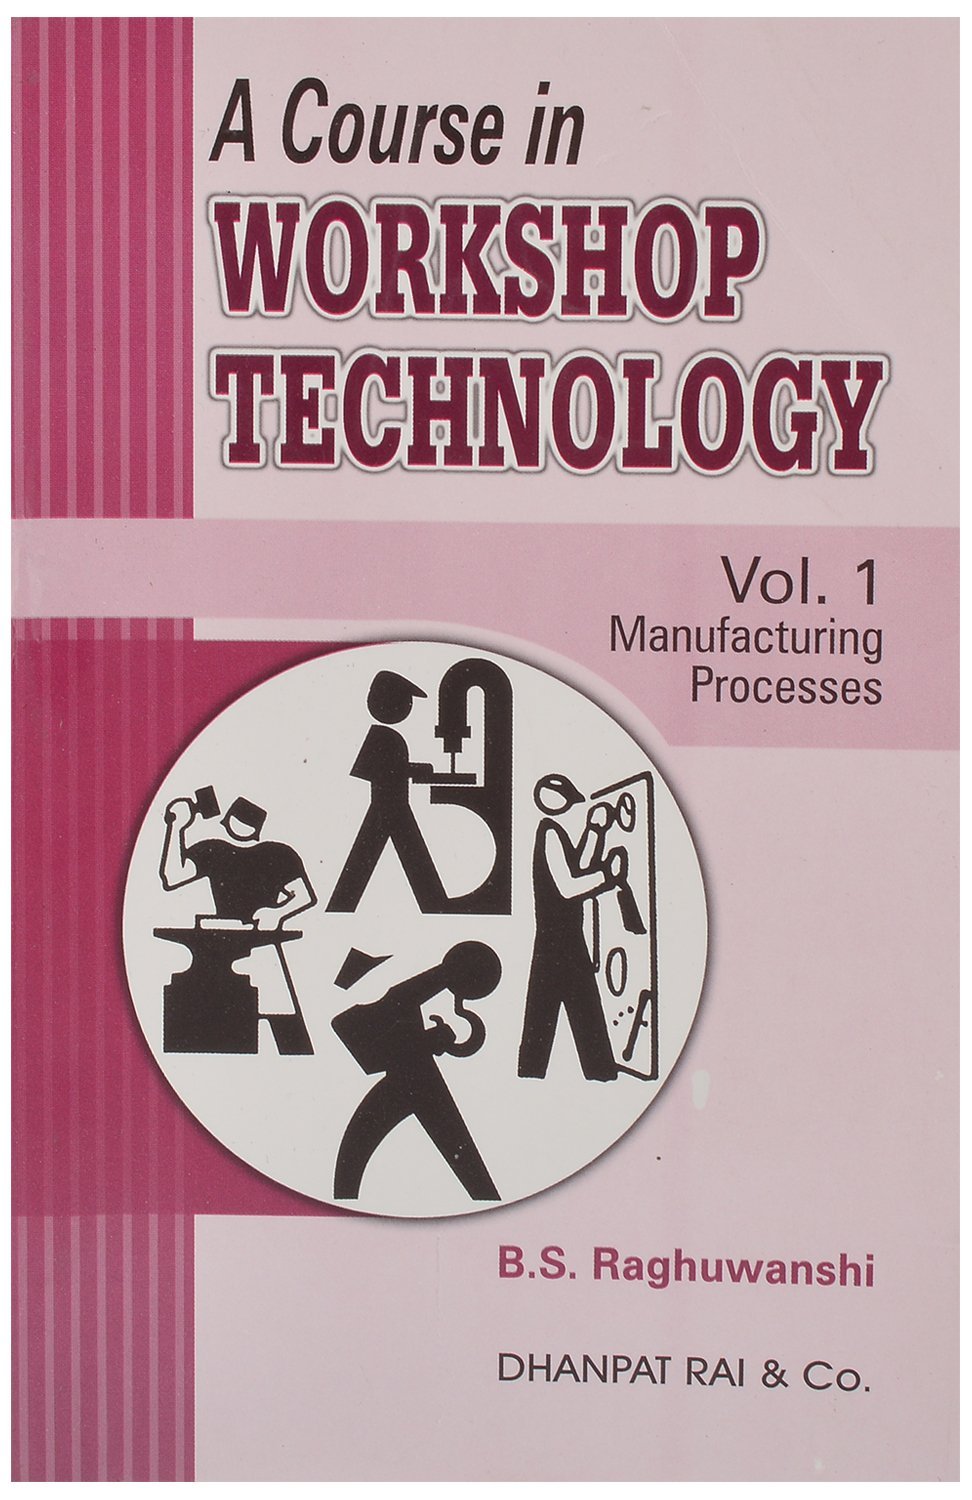 A Course in Workshop Technology Vol I